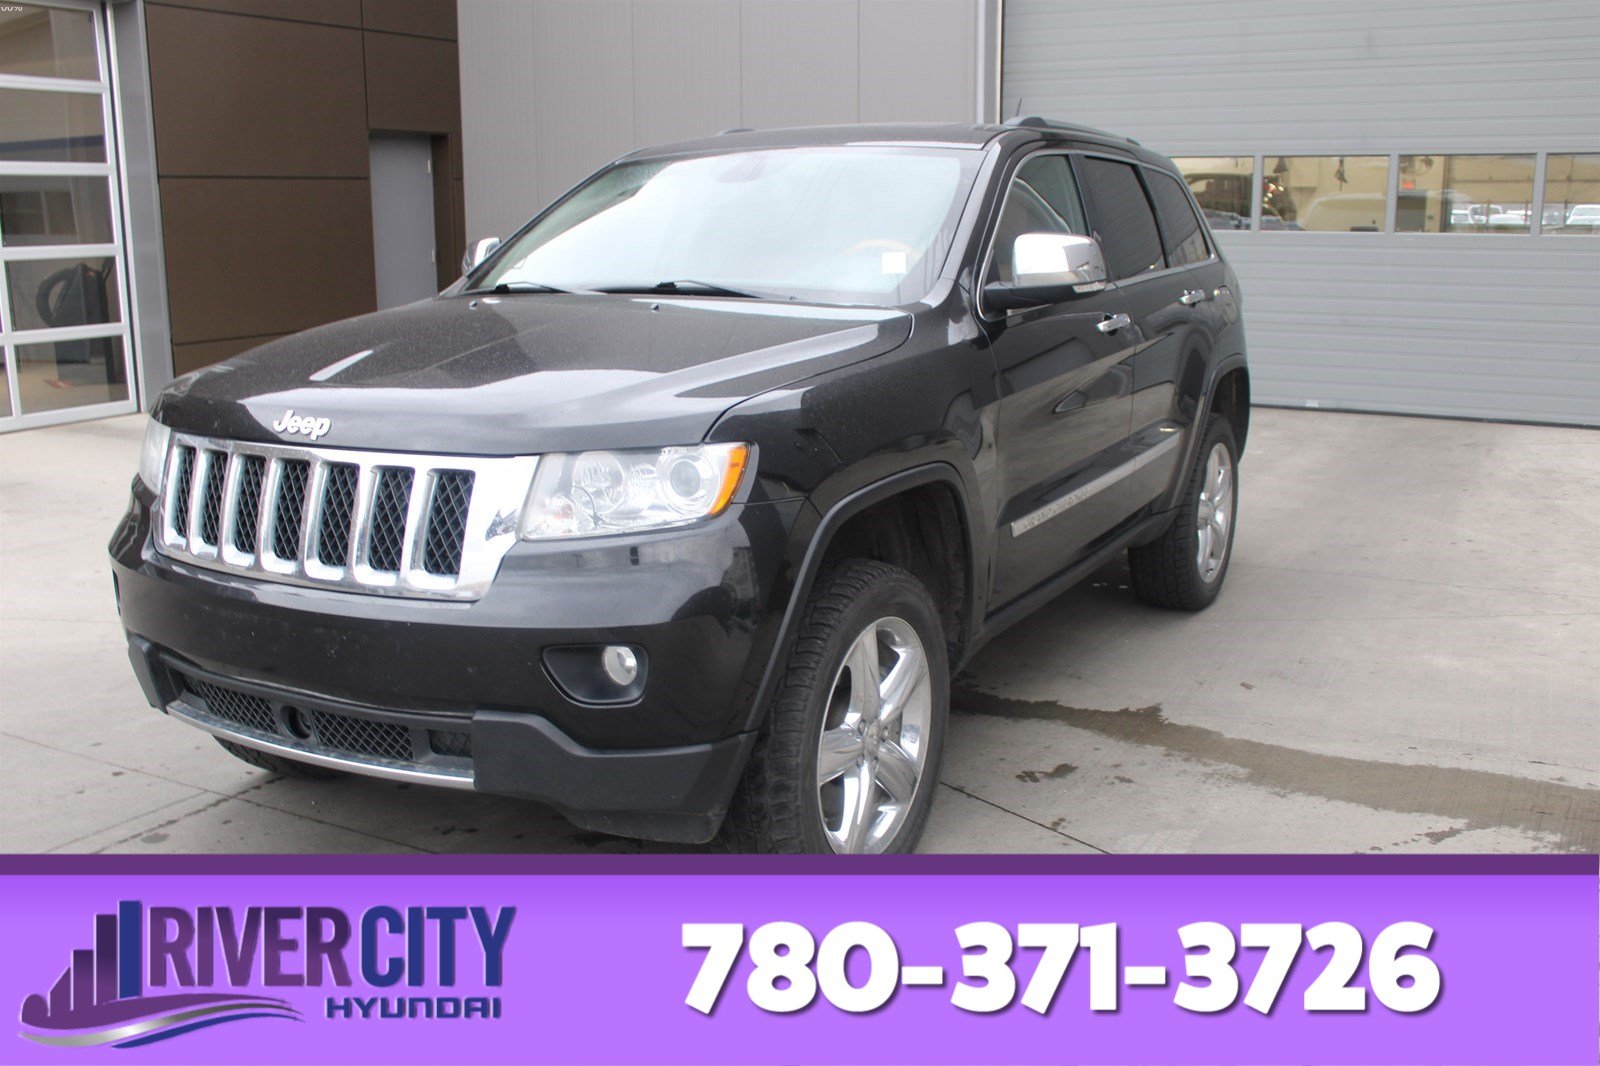 Pre Owned 2011 Jeep Grand Cherokee Awd Overland Leather Heated Seats Panoramic Roof Bluetooth A C With Navigation